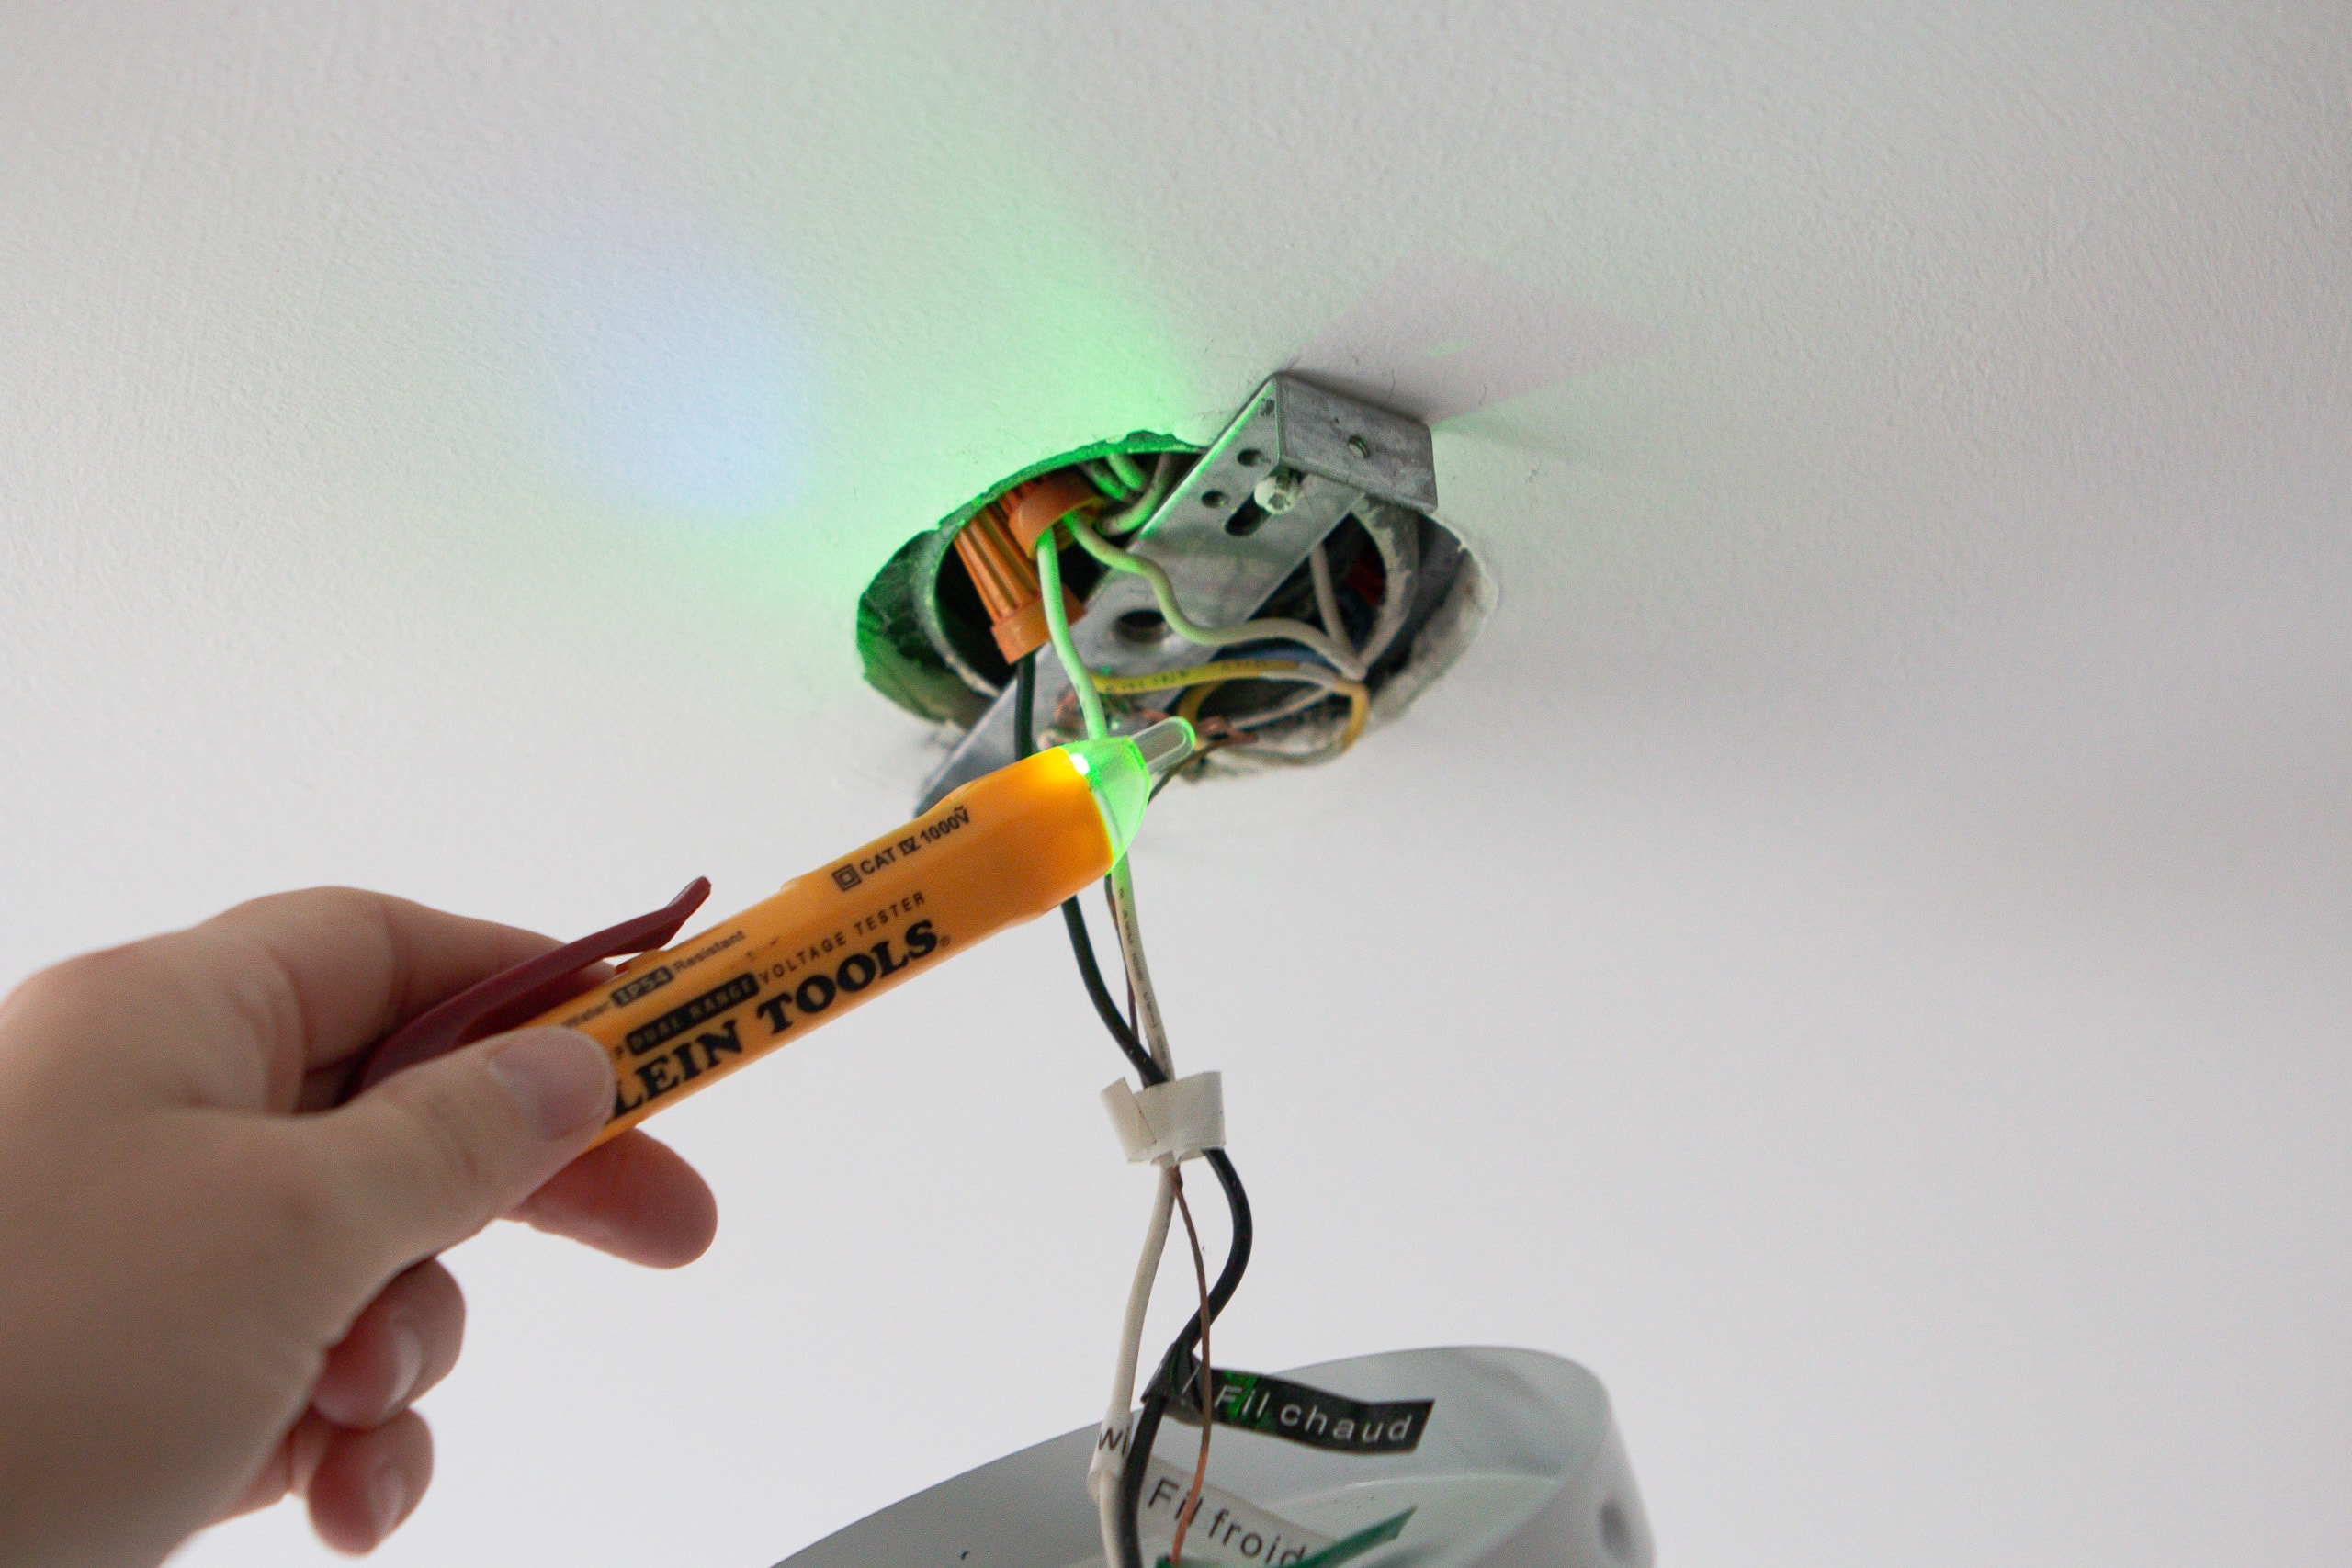 use your voltage tester to make sure the power is off